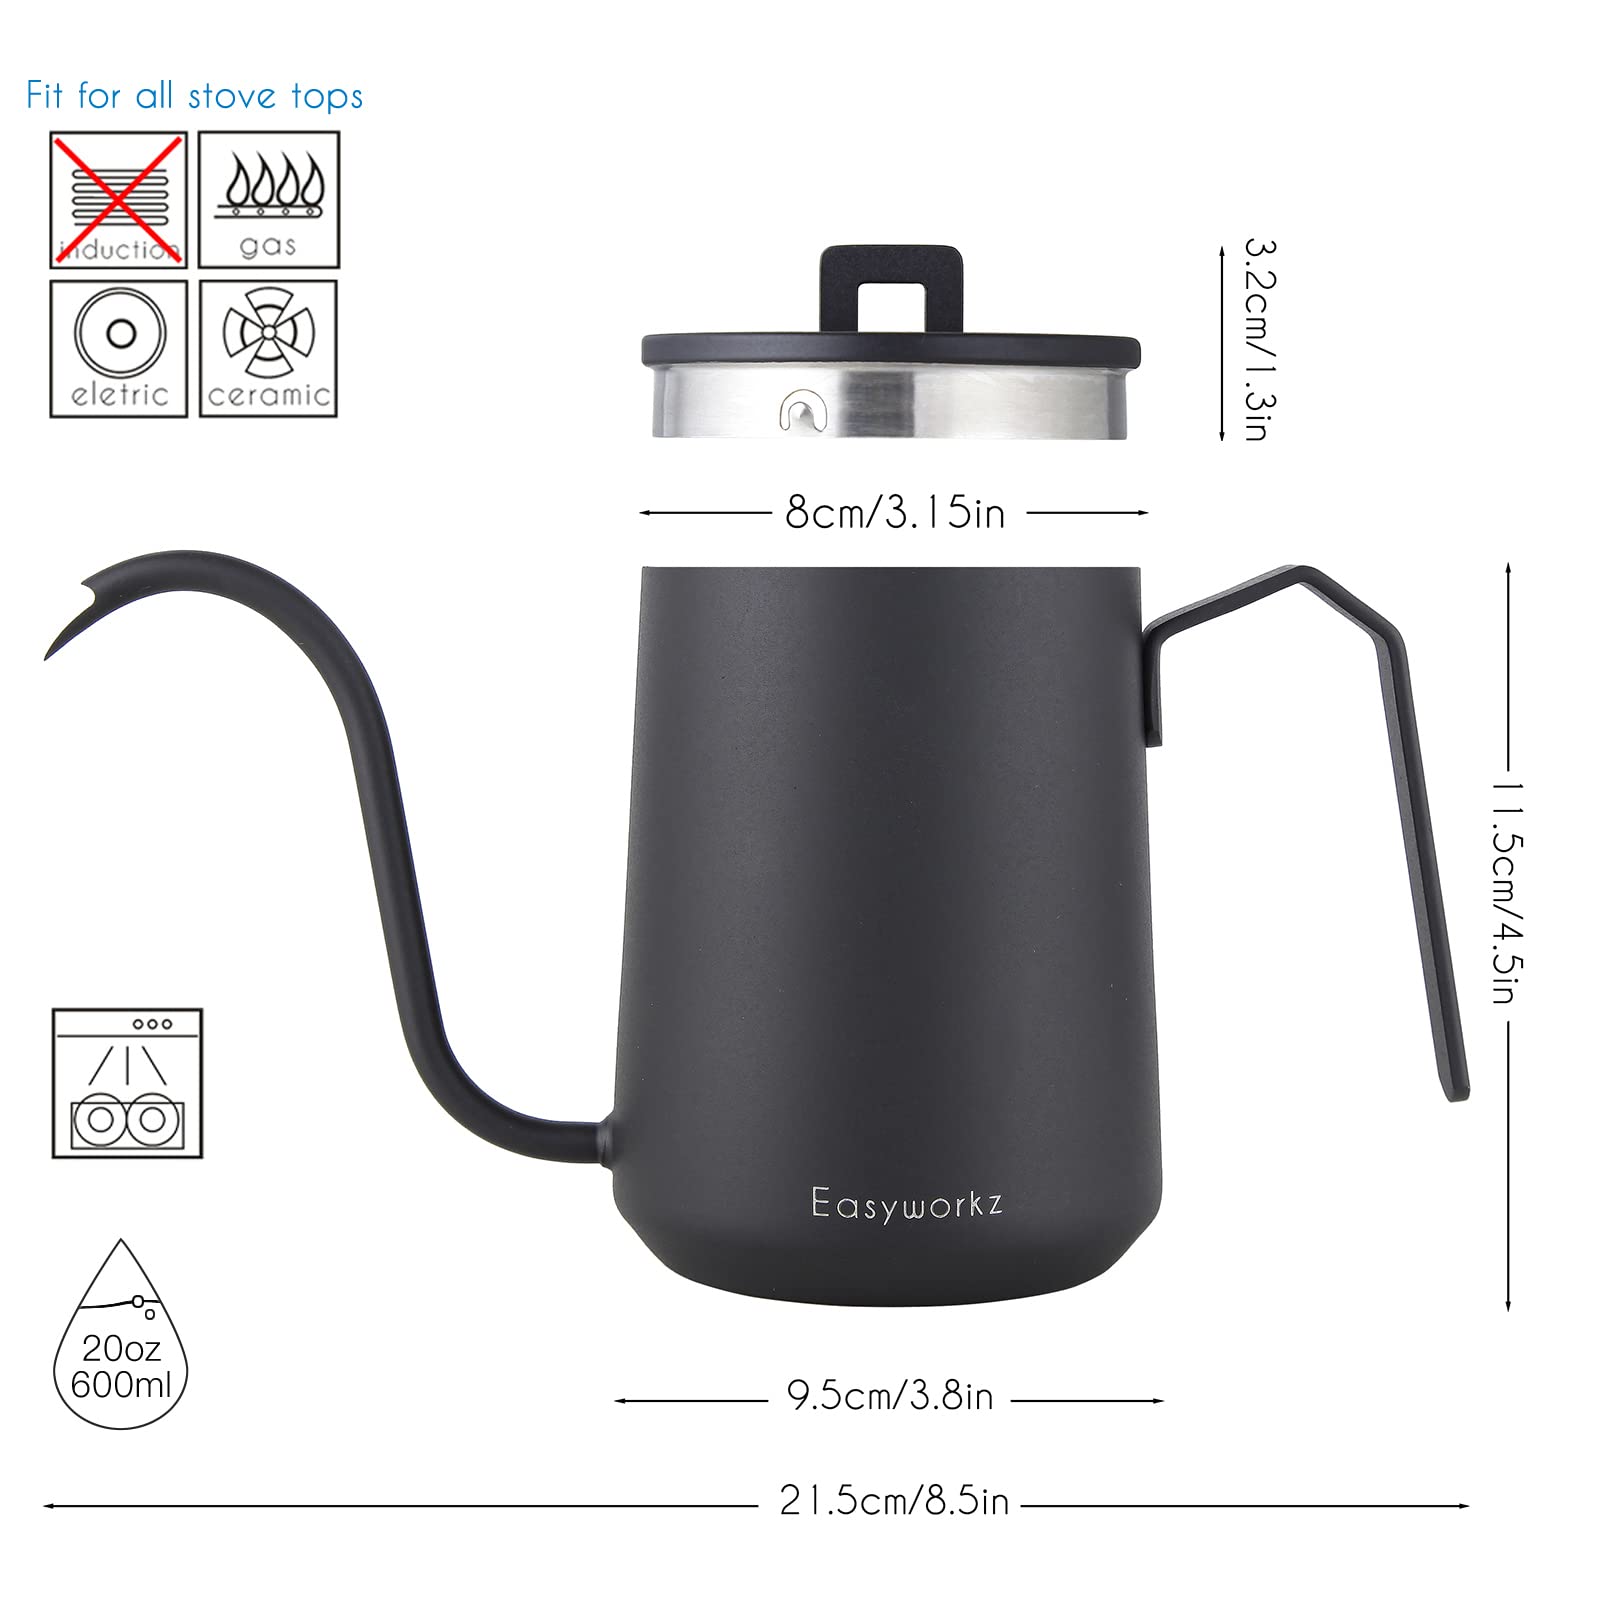 Easyworkz Gooseneck Pour Over Coffee Kettle 20 oz Stainless Steel Hand Drip Coffee Pot With Long Narrow Spout, Matte Black